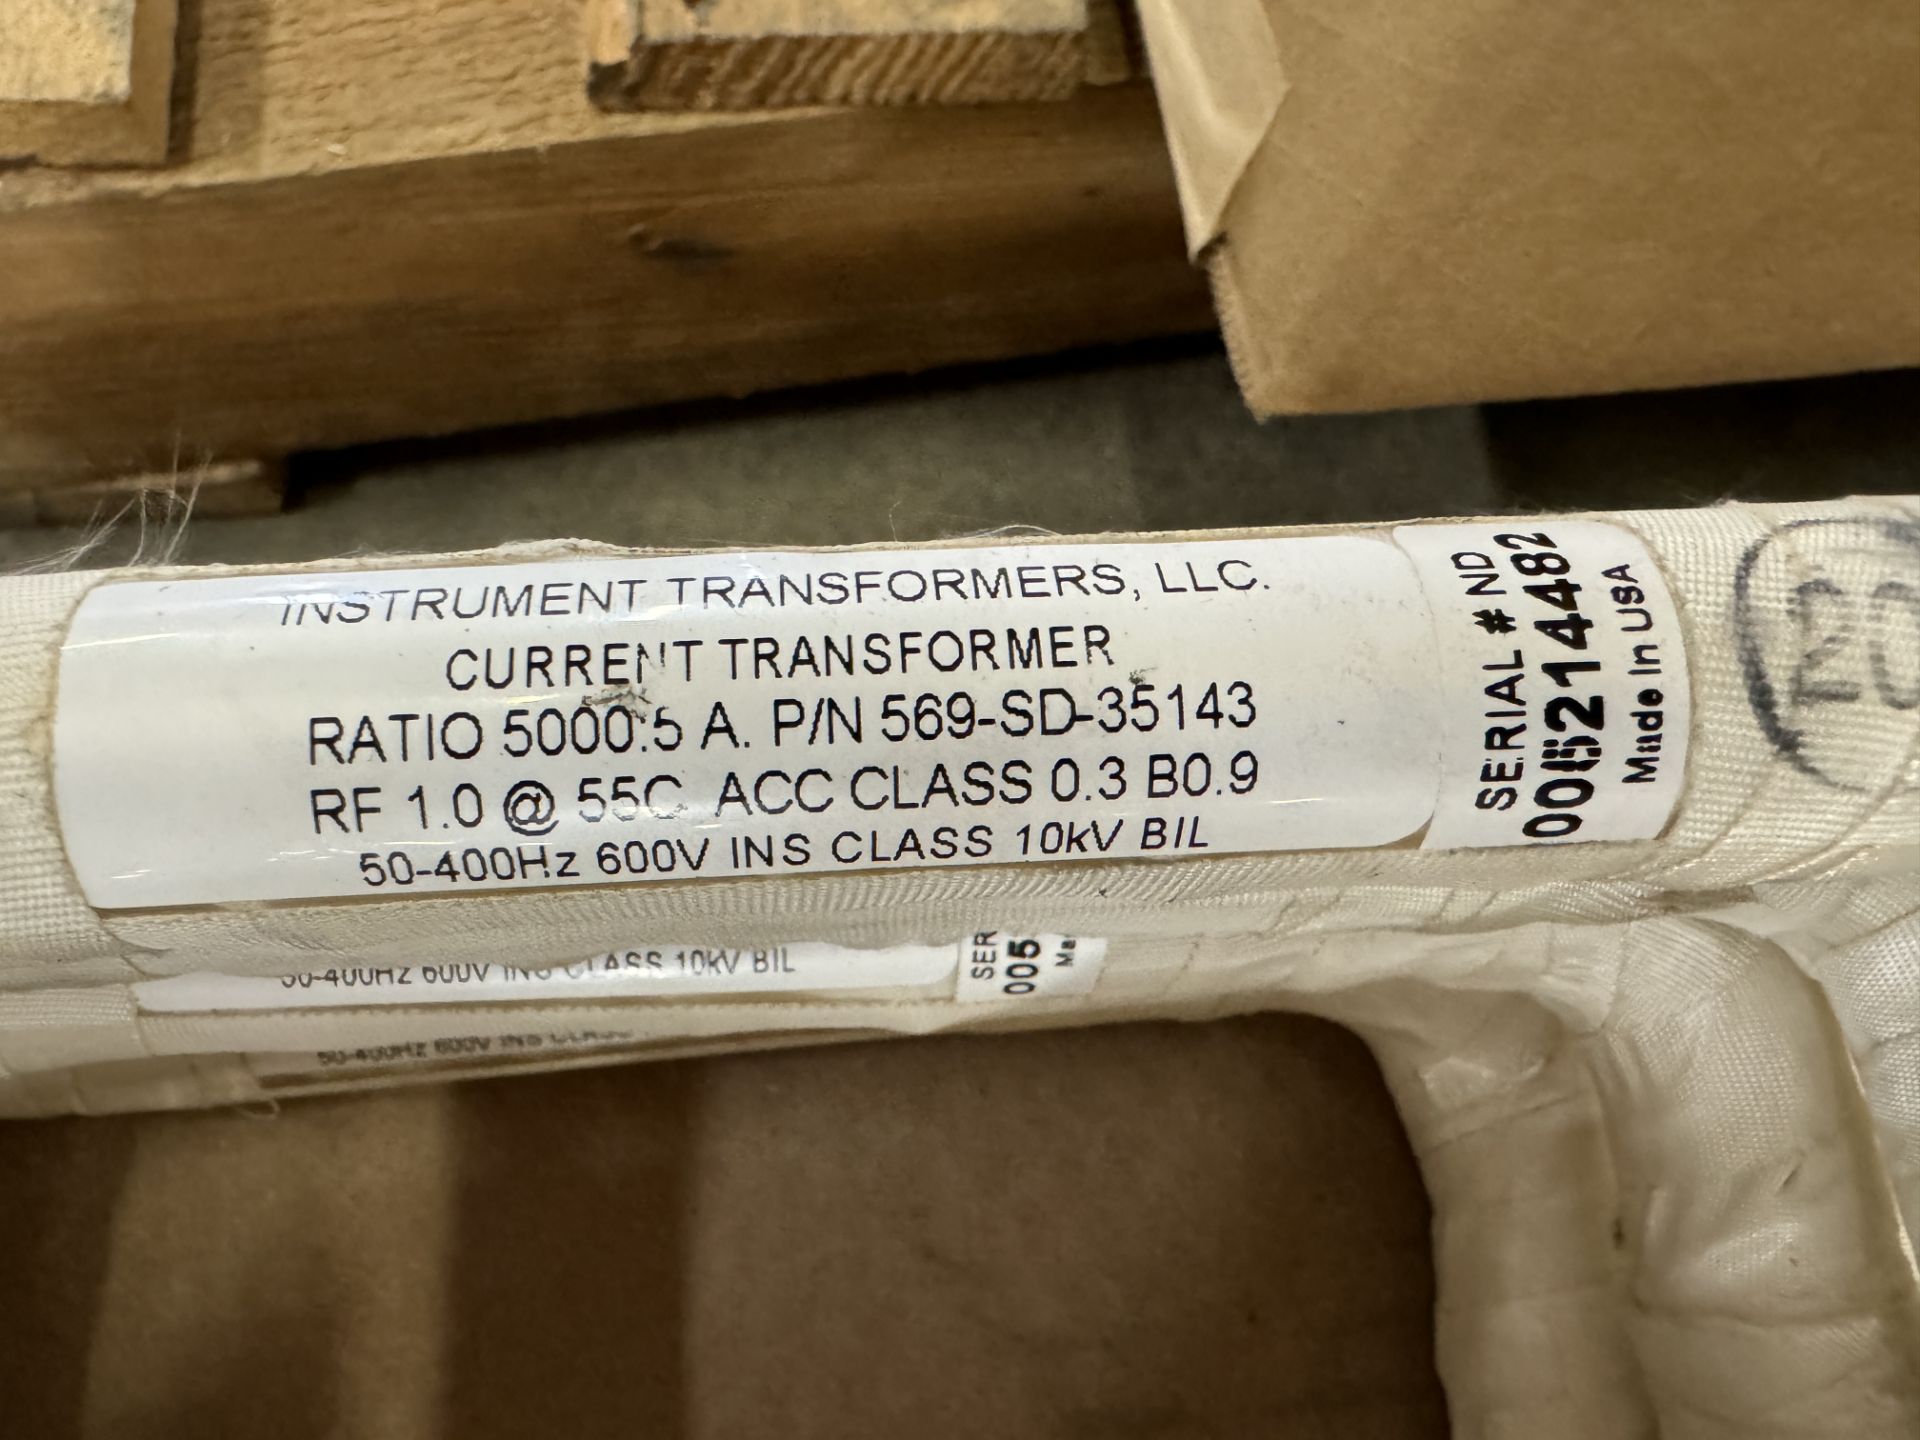 (13) INSTRUMENT TRANSFORMERS CURRENT TRANSFORMERS; RATIO-5000:5A; P/N 569-SD-35143 - Image 3 of 3